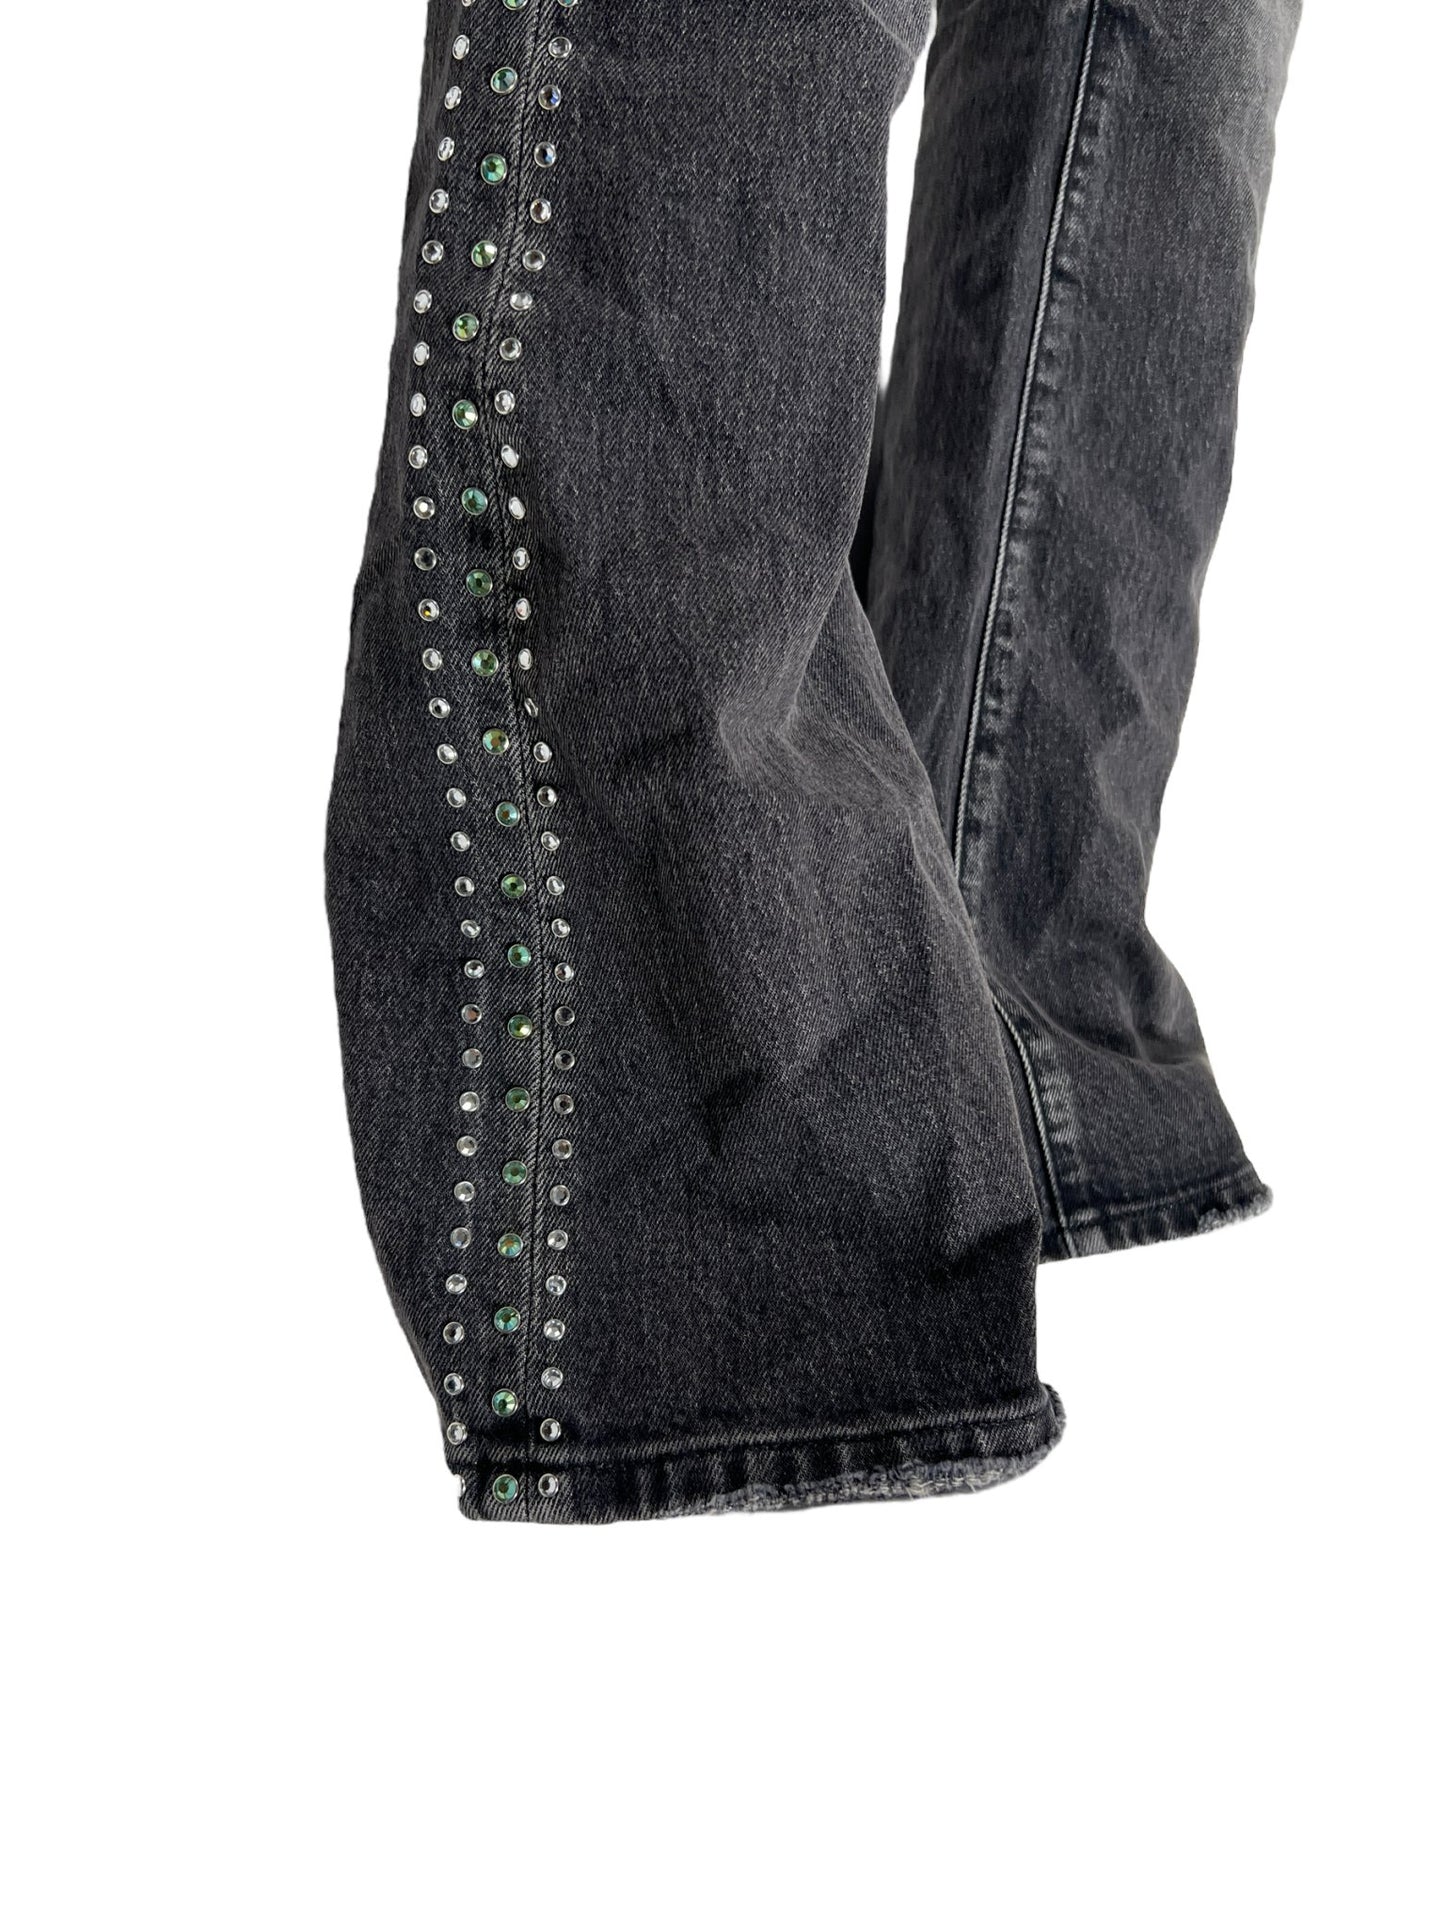 A pair of PURPLE BRAND P004-VNBL VINTAGE FLARE BLACK jeans with green studding on them.